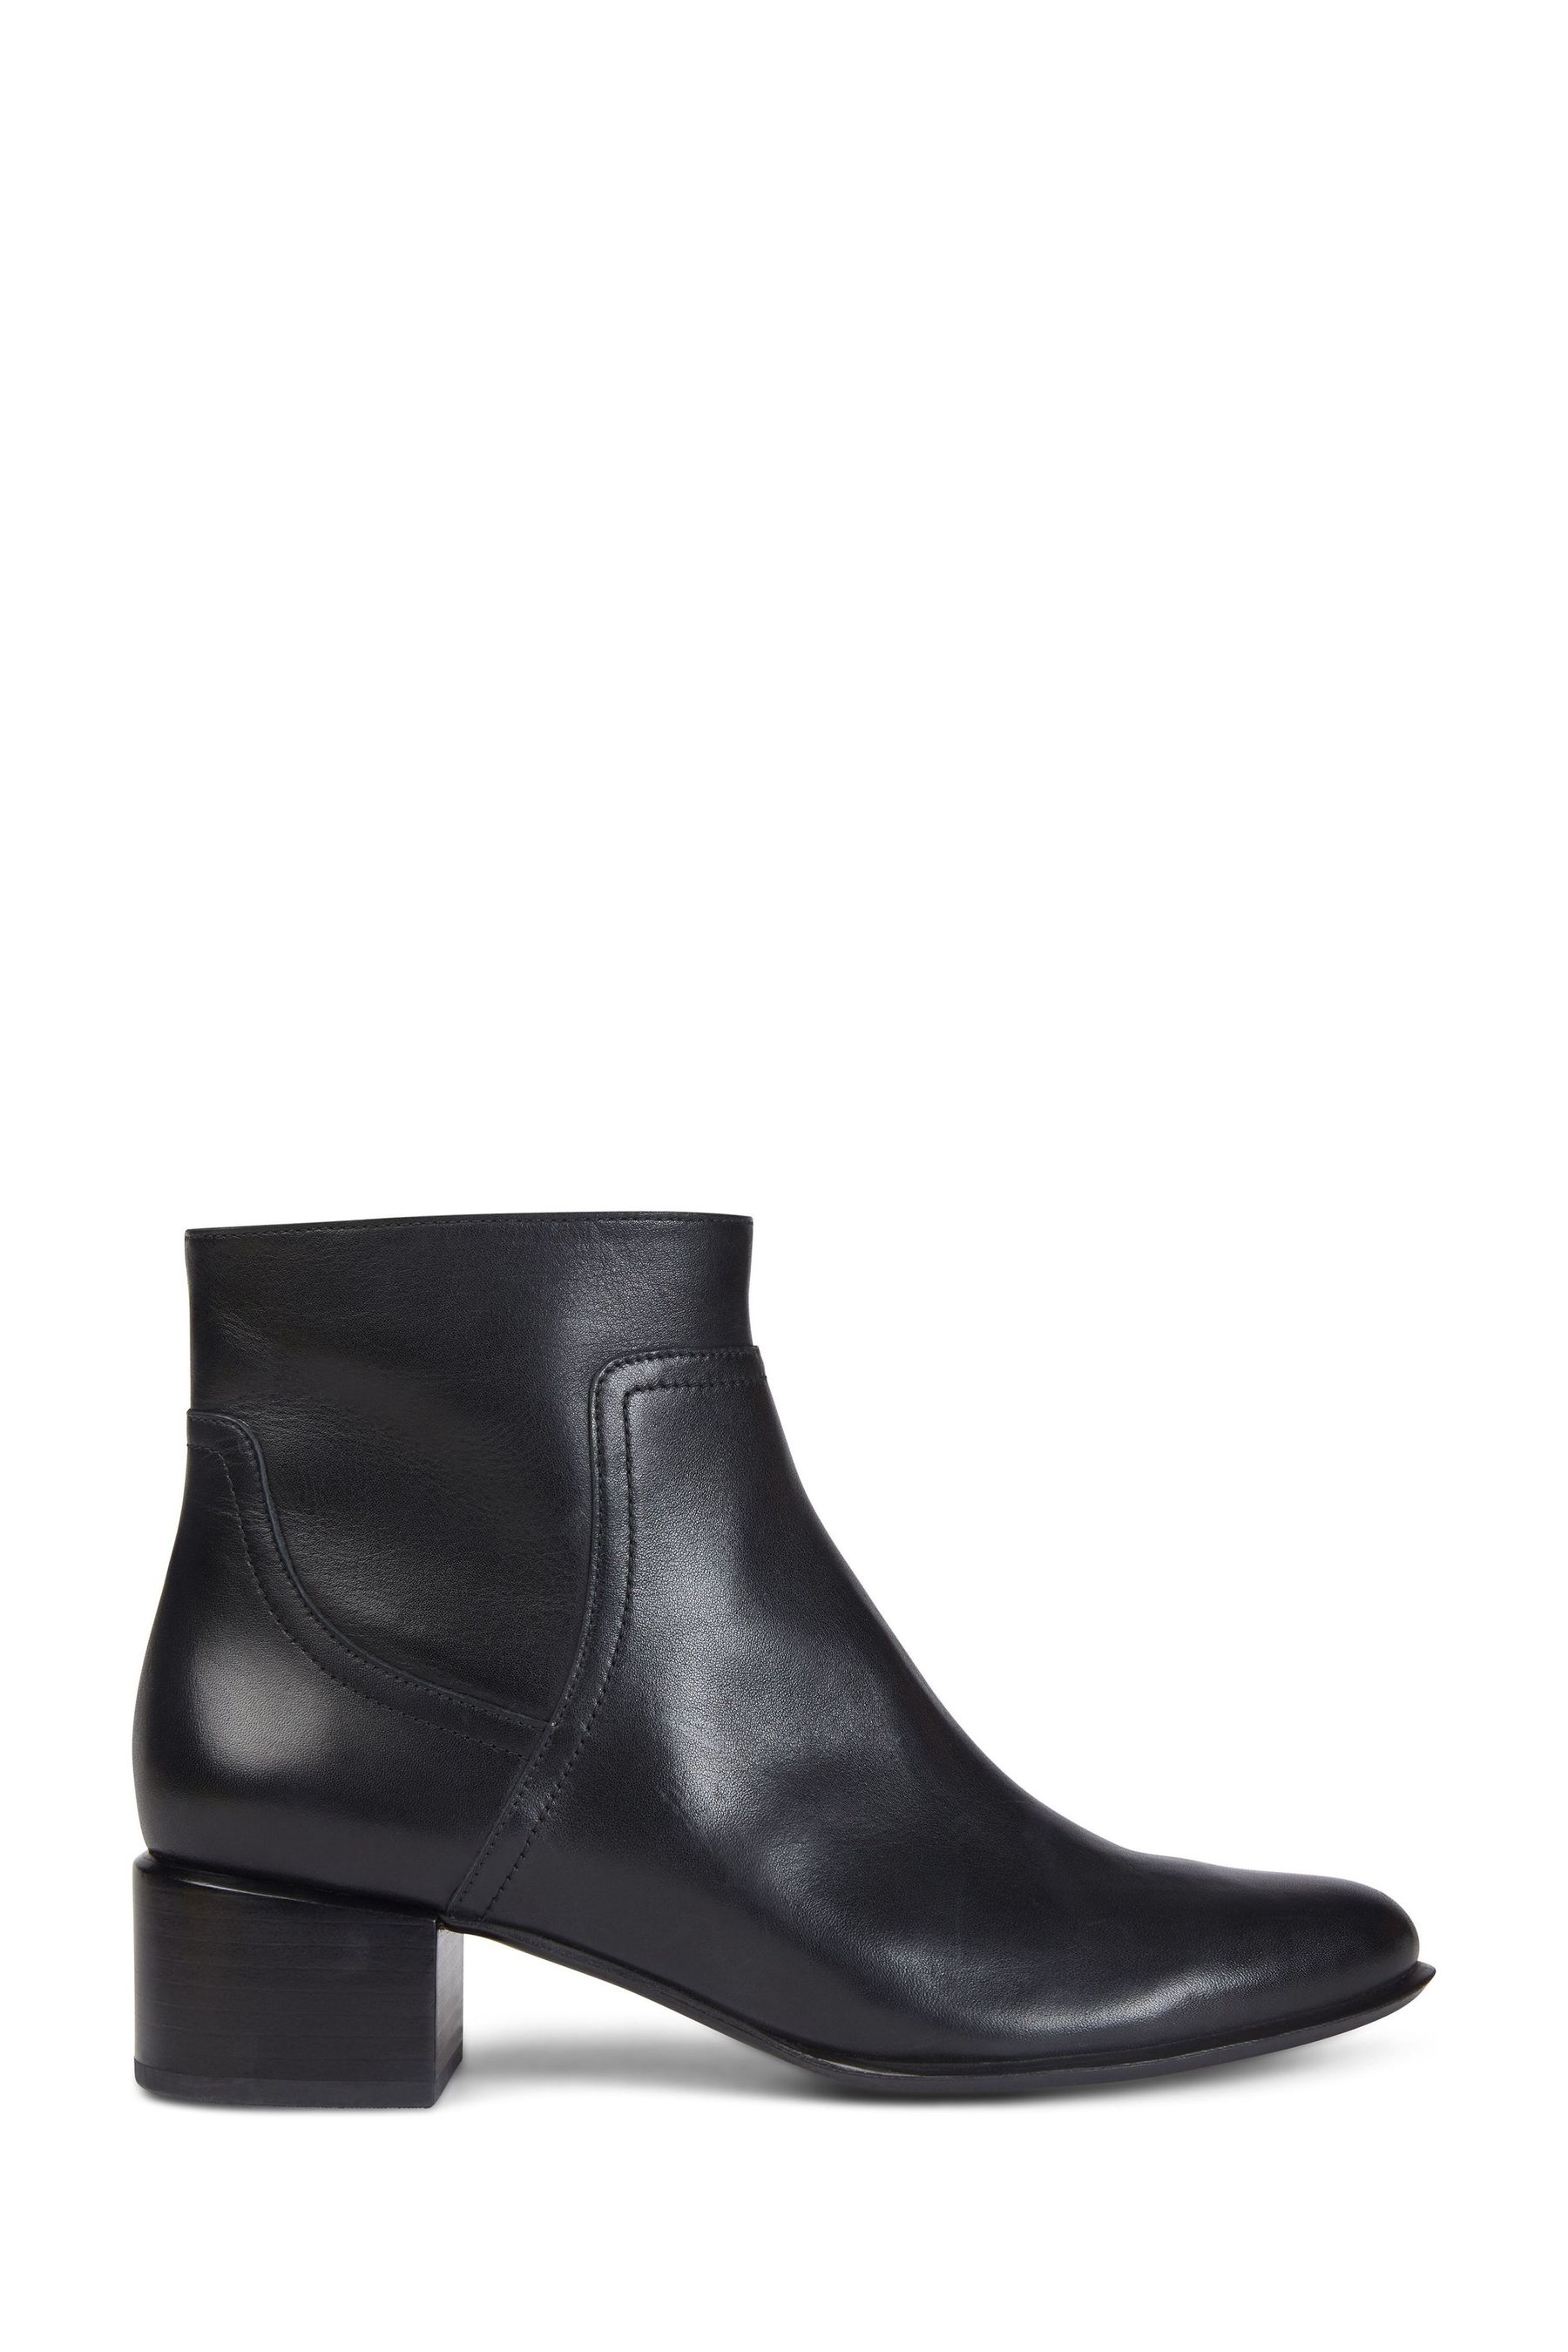 Buy Vionic Kamryn Waterproof Ankle Boots from the Next UK online shop